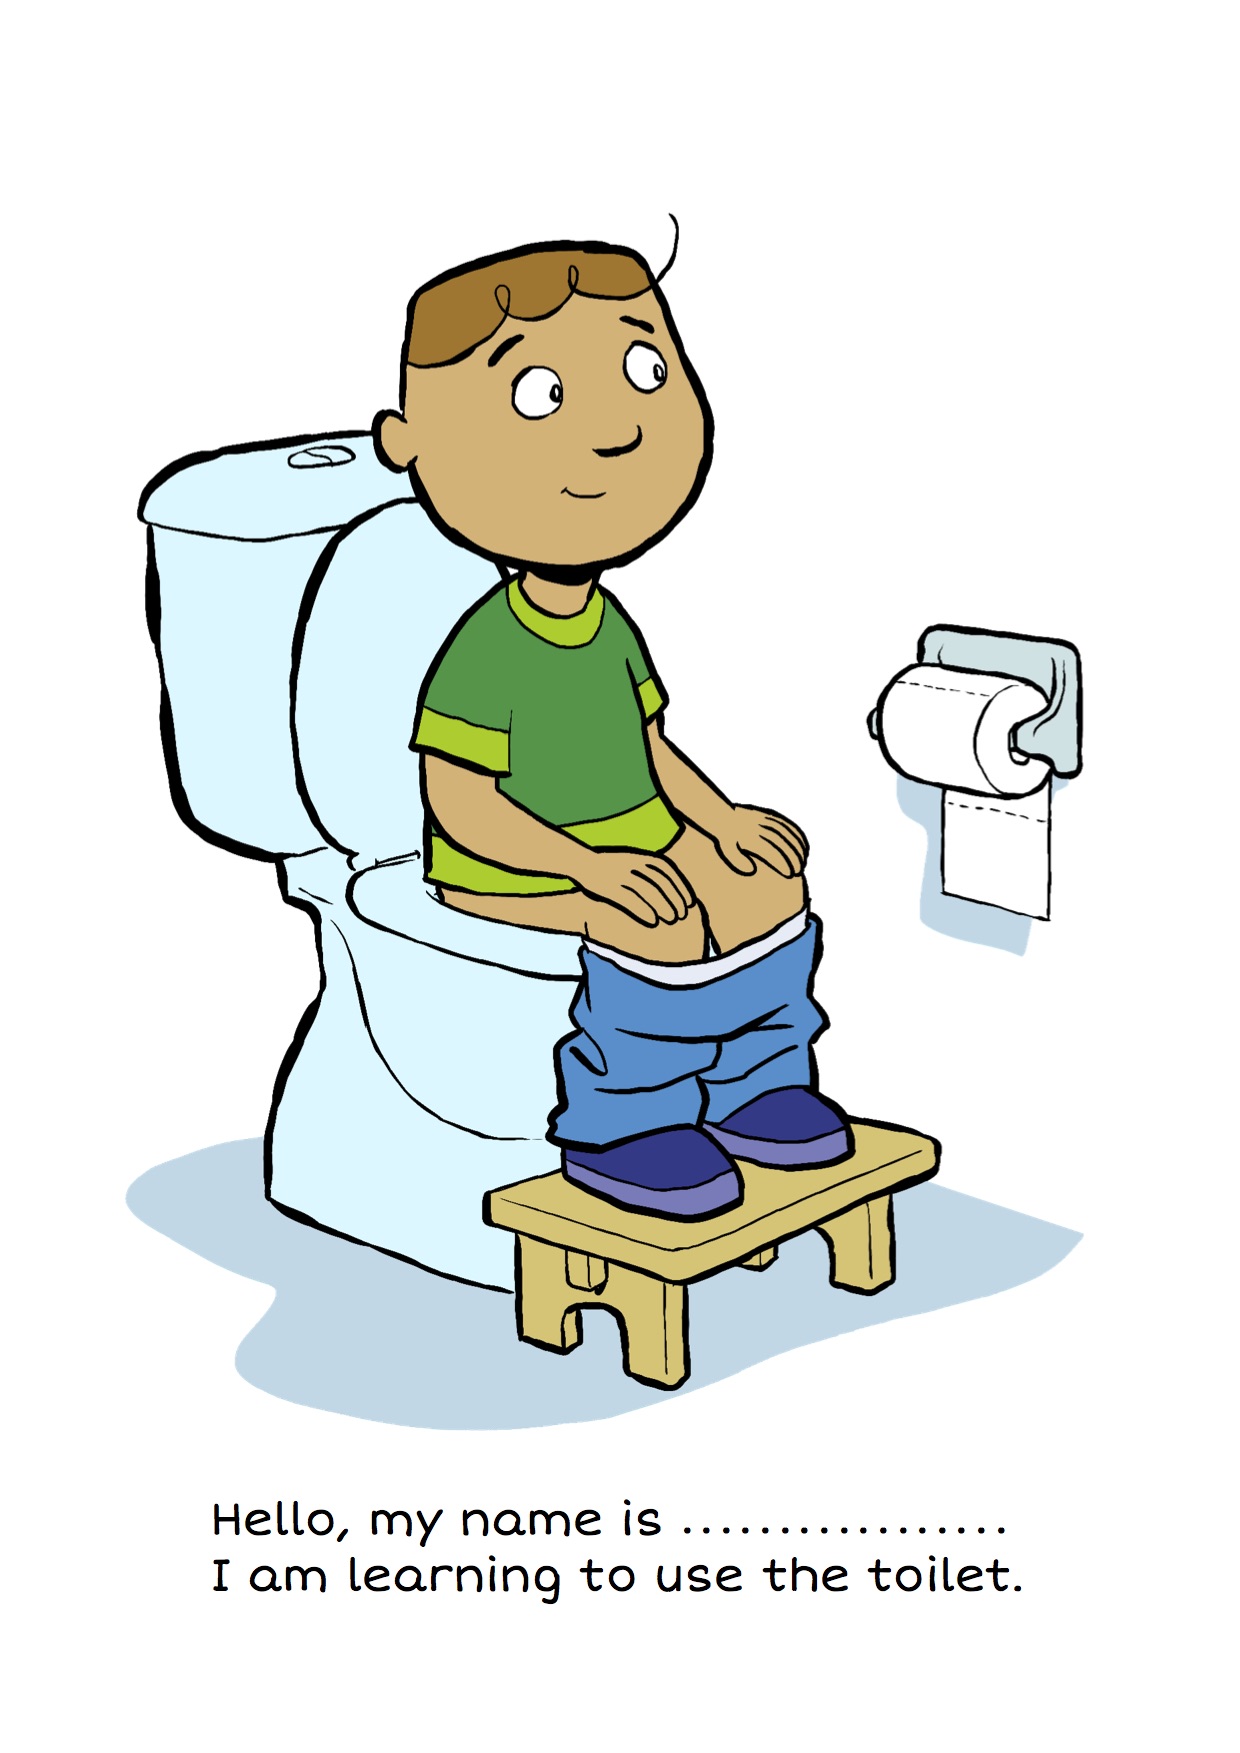 Toilet Time: A story for boys learning to use the toilet for wee and poo